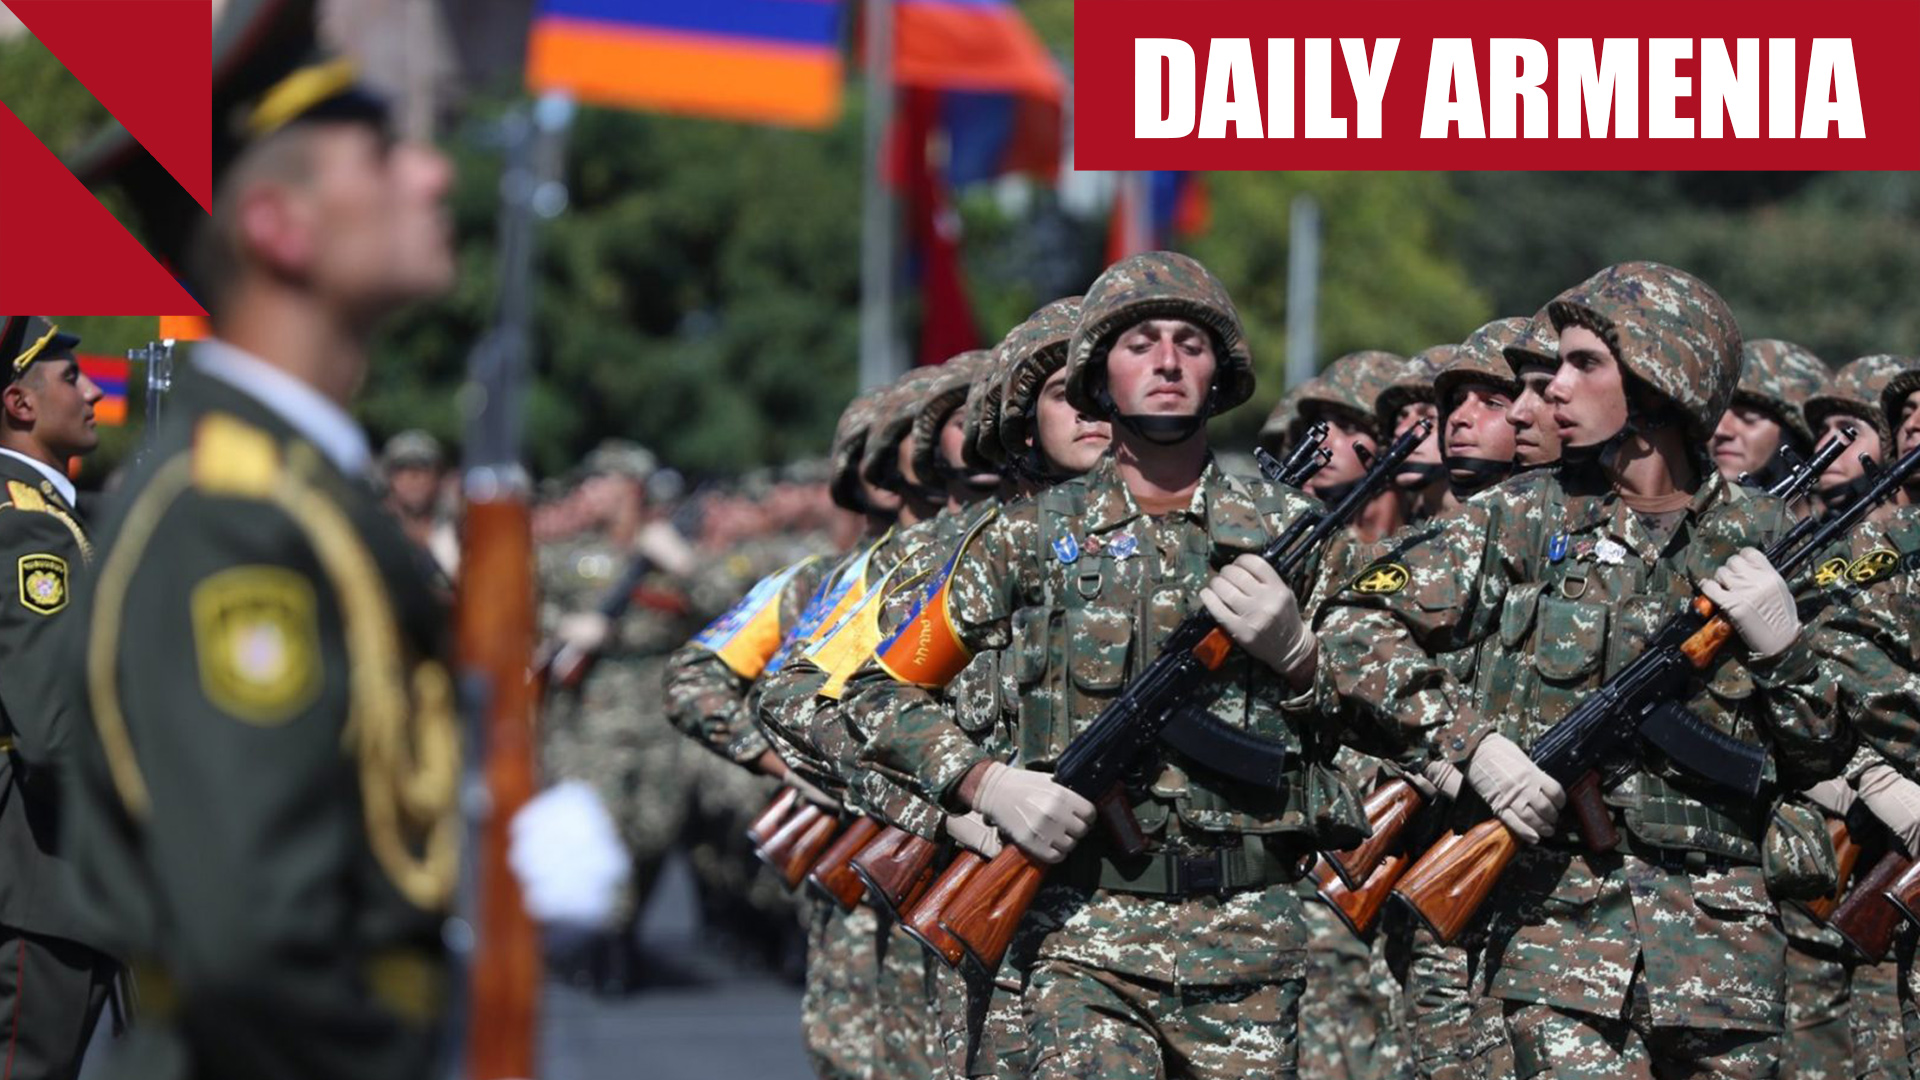 EU-and-UK-express-readiness-to-strengthen-defense-ties-with-Armenia